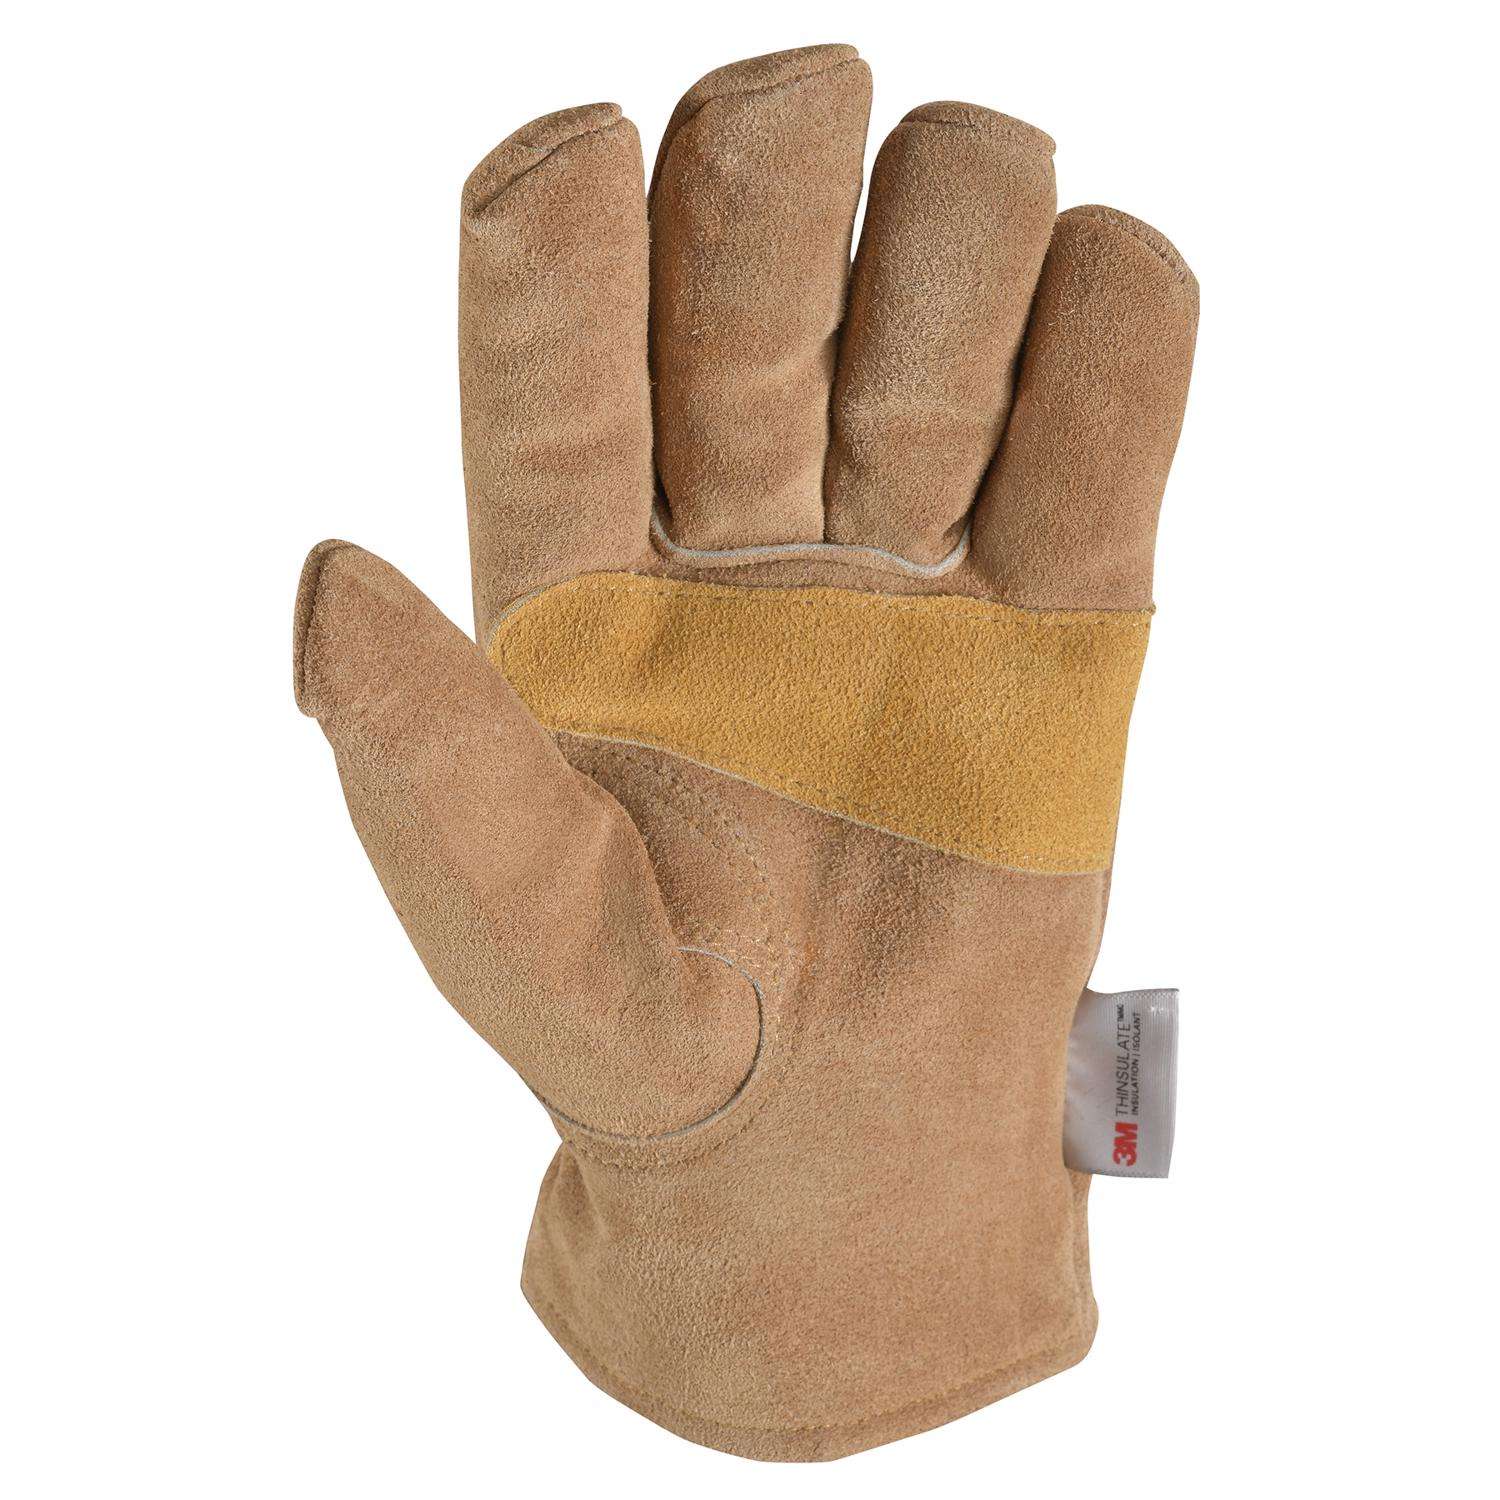 Wells Lamont XL Men's Leather Work Gloves 100% Cowhide Leather SHIPS FREE